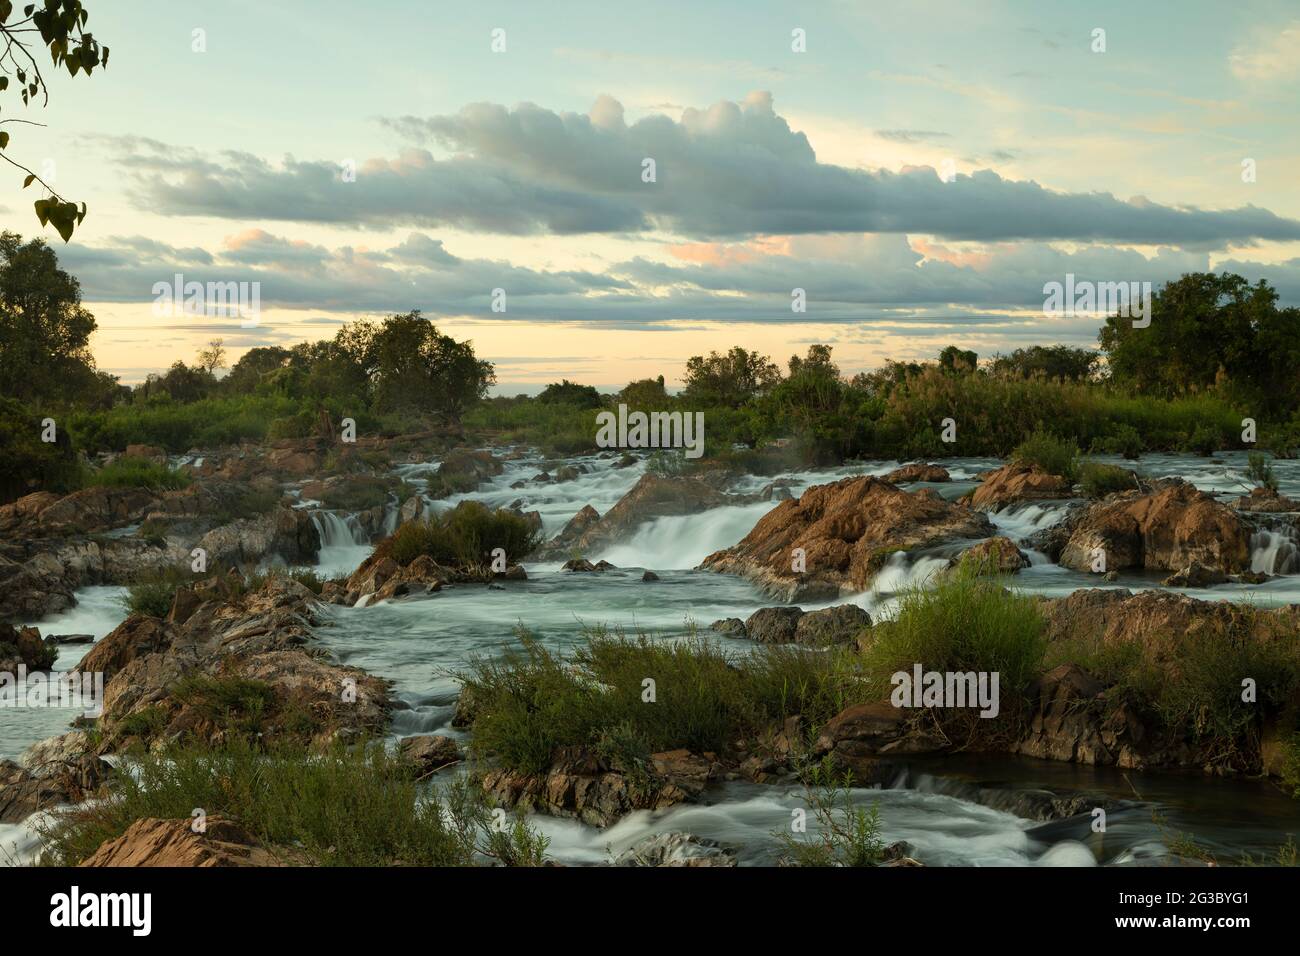 River landscape at sunset of the famous Li Phi or Tat Somphamit waterfalls, on the Mekong River, seen from Don Khon Island in Laos Stock Photo